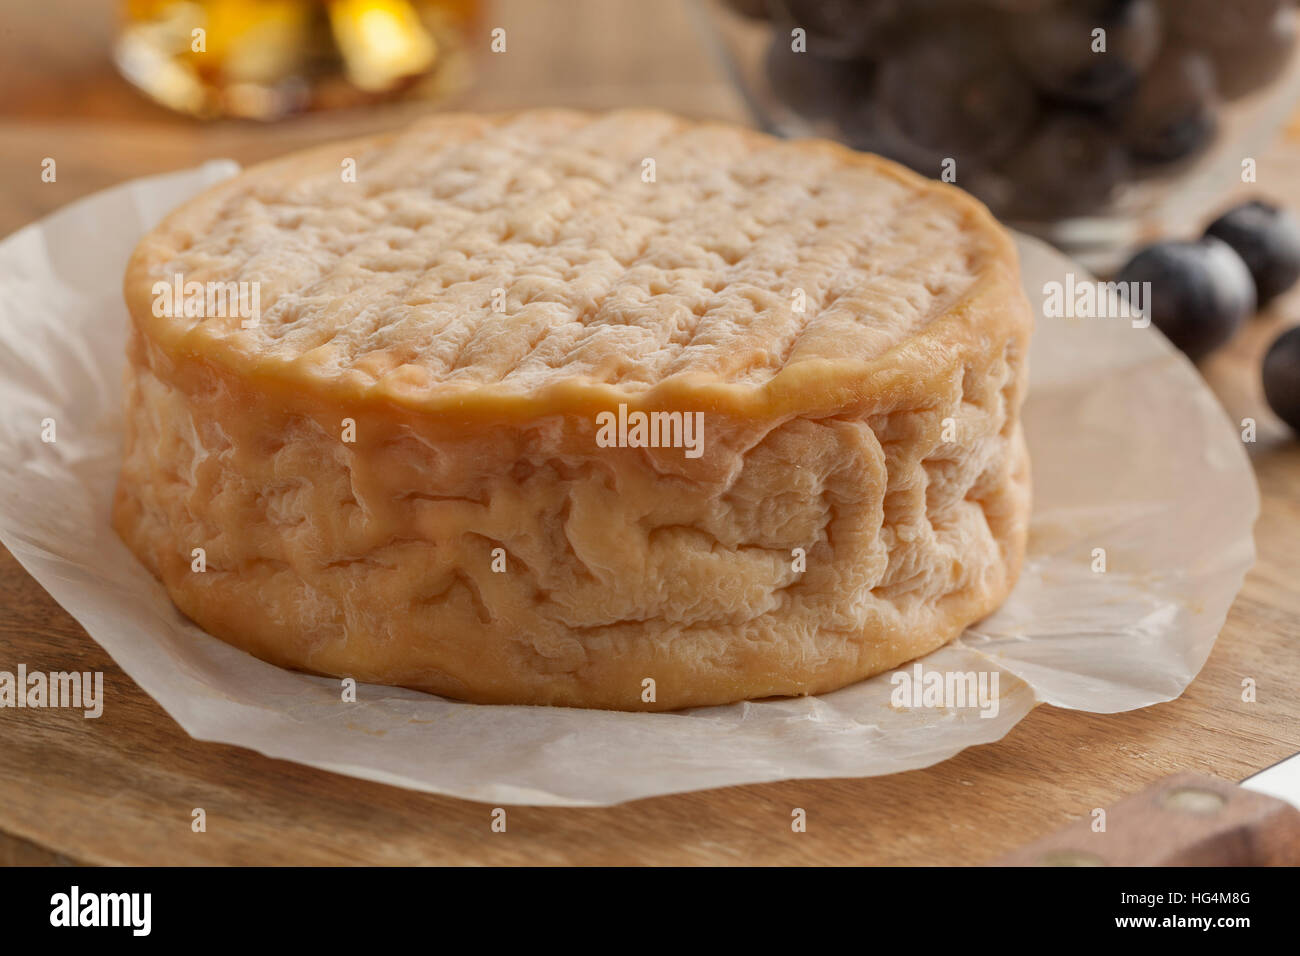 Whole french creamy ripe Epoisses cheese close up Stock Photo